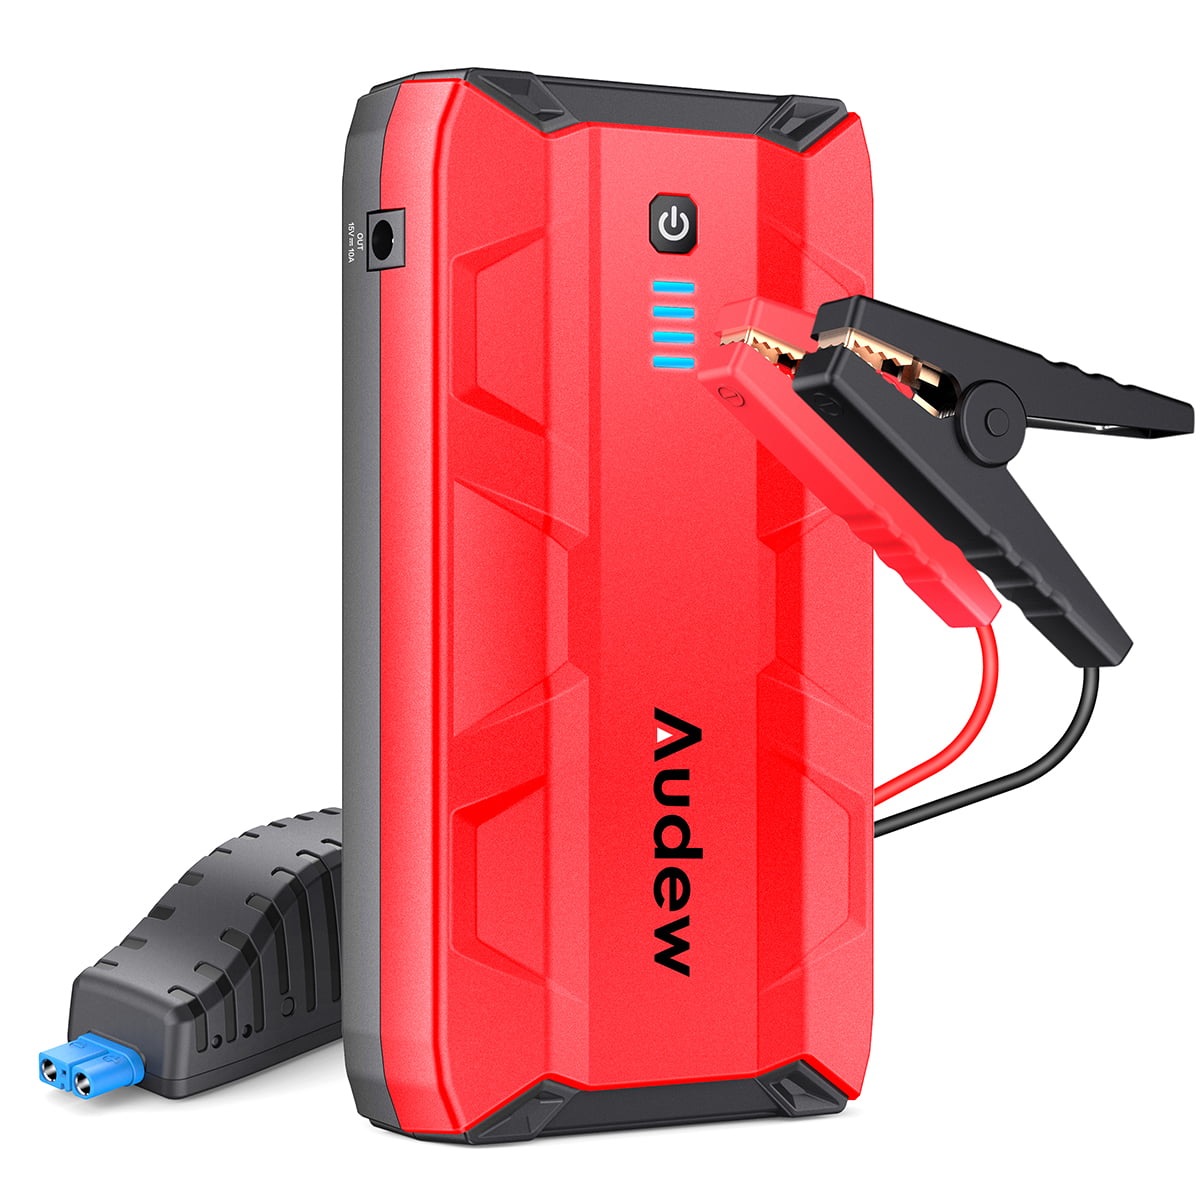 Auto Battery Booster Pack with Smart Safety Jumper Cable Fast Outputs 3.0 up to 8.0L Gas/7.0L Diesel Engines Car Jump Starter BUTURE 1600A Peak 20000mAh Portable Car Battery Starter 